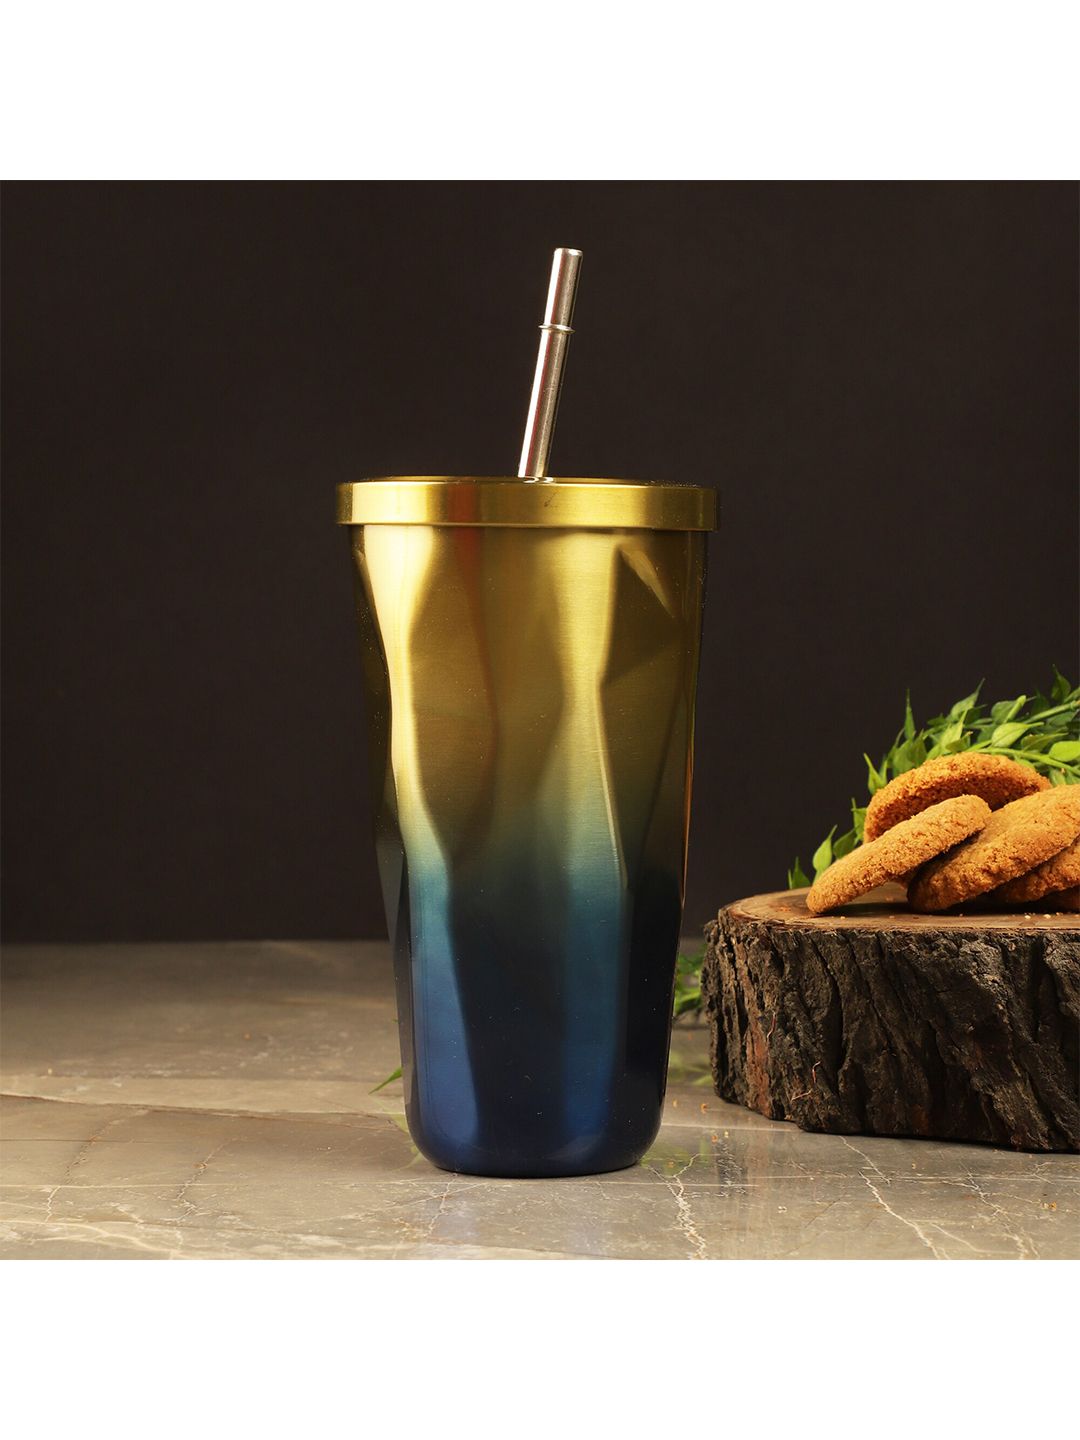 The Decor Mart Gold-Toned & Teal Solid Stainless Steel Glossy Mugs Set of Cups and Mugs Price in India